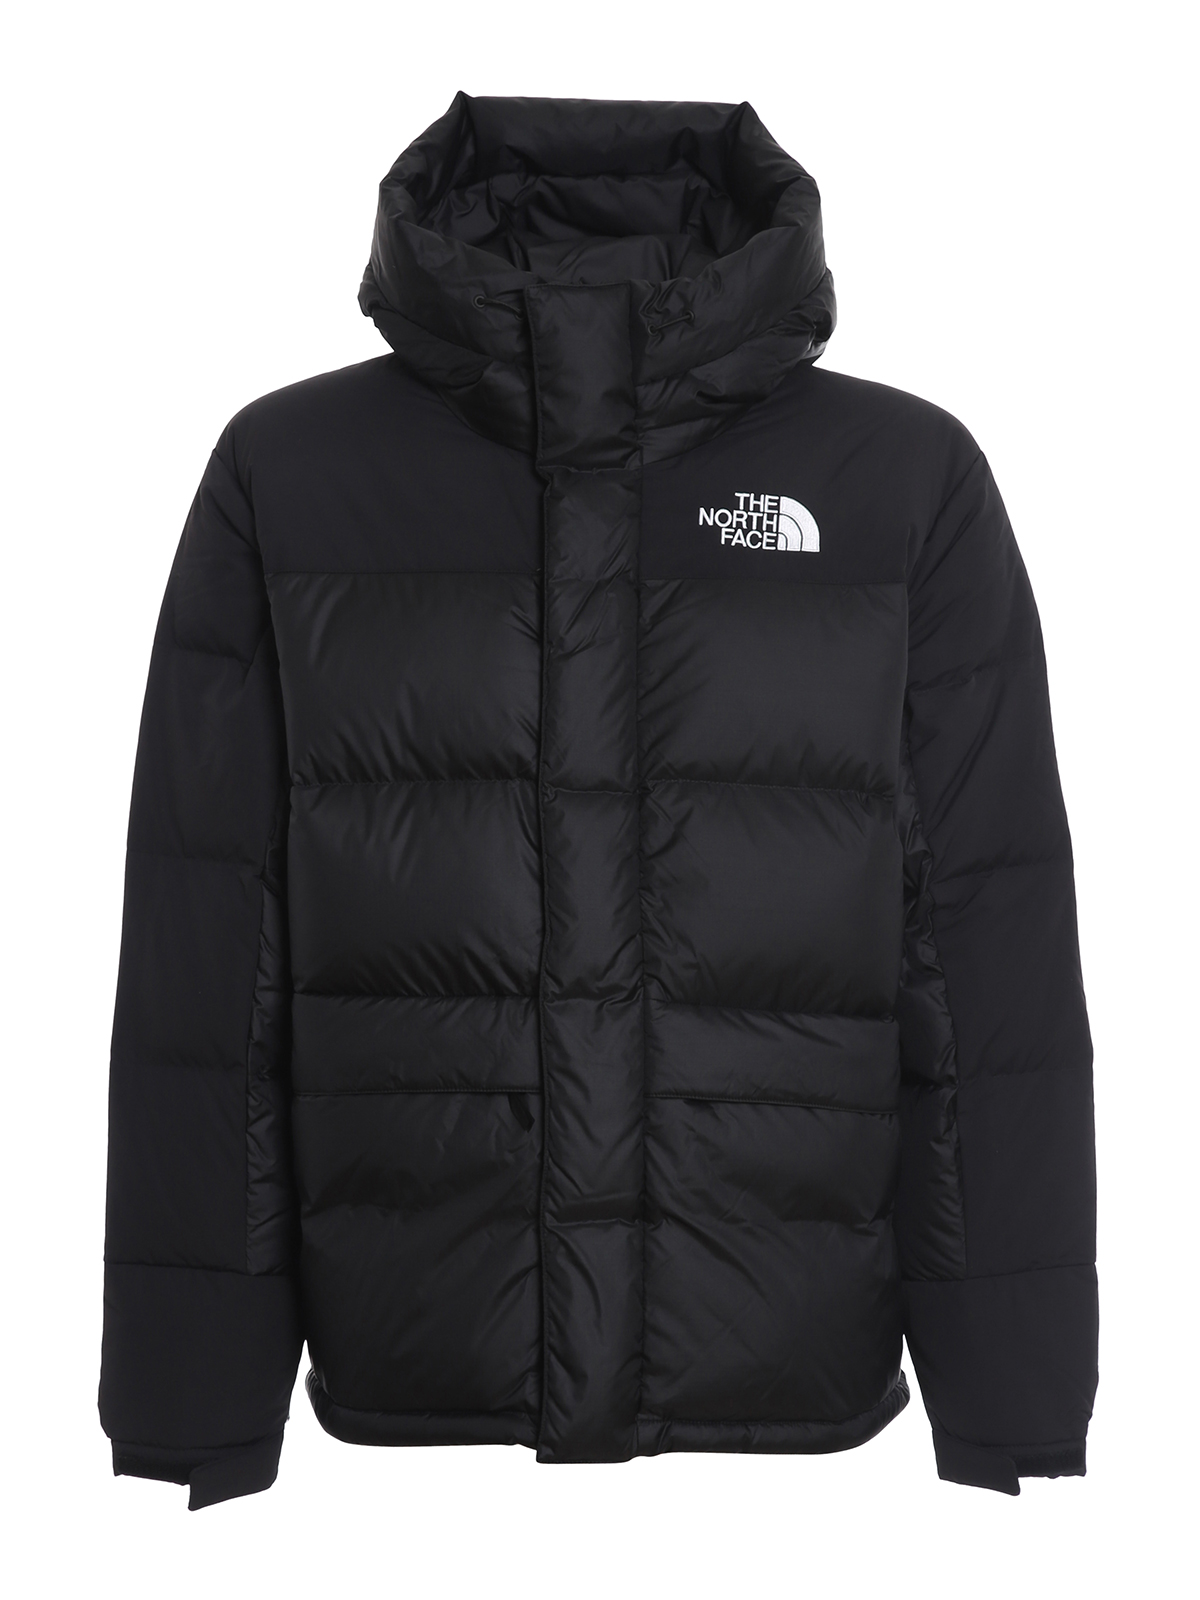 Padded jackets The North Face - Himalayan padded jacket - NF0A4QYXJK3M